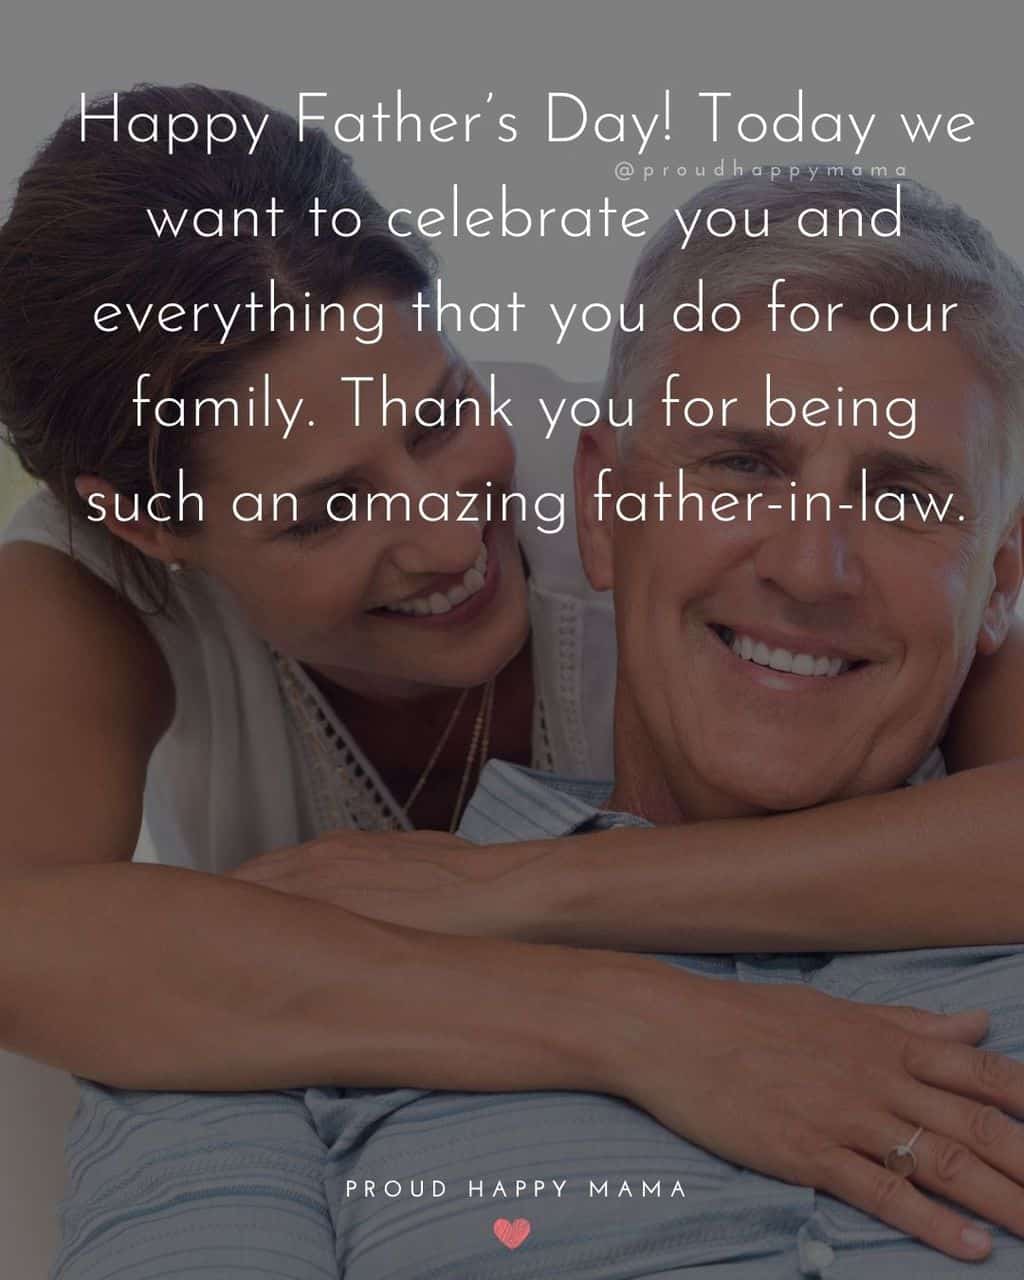 Happy Fathers Day Quotes For Father In Law - Happy Father’s Day! Today we want to celebrate you and everything that you do